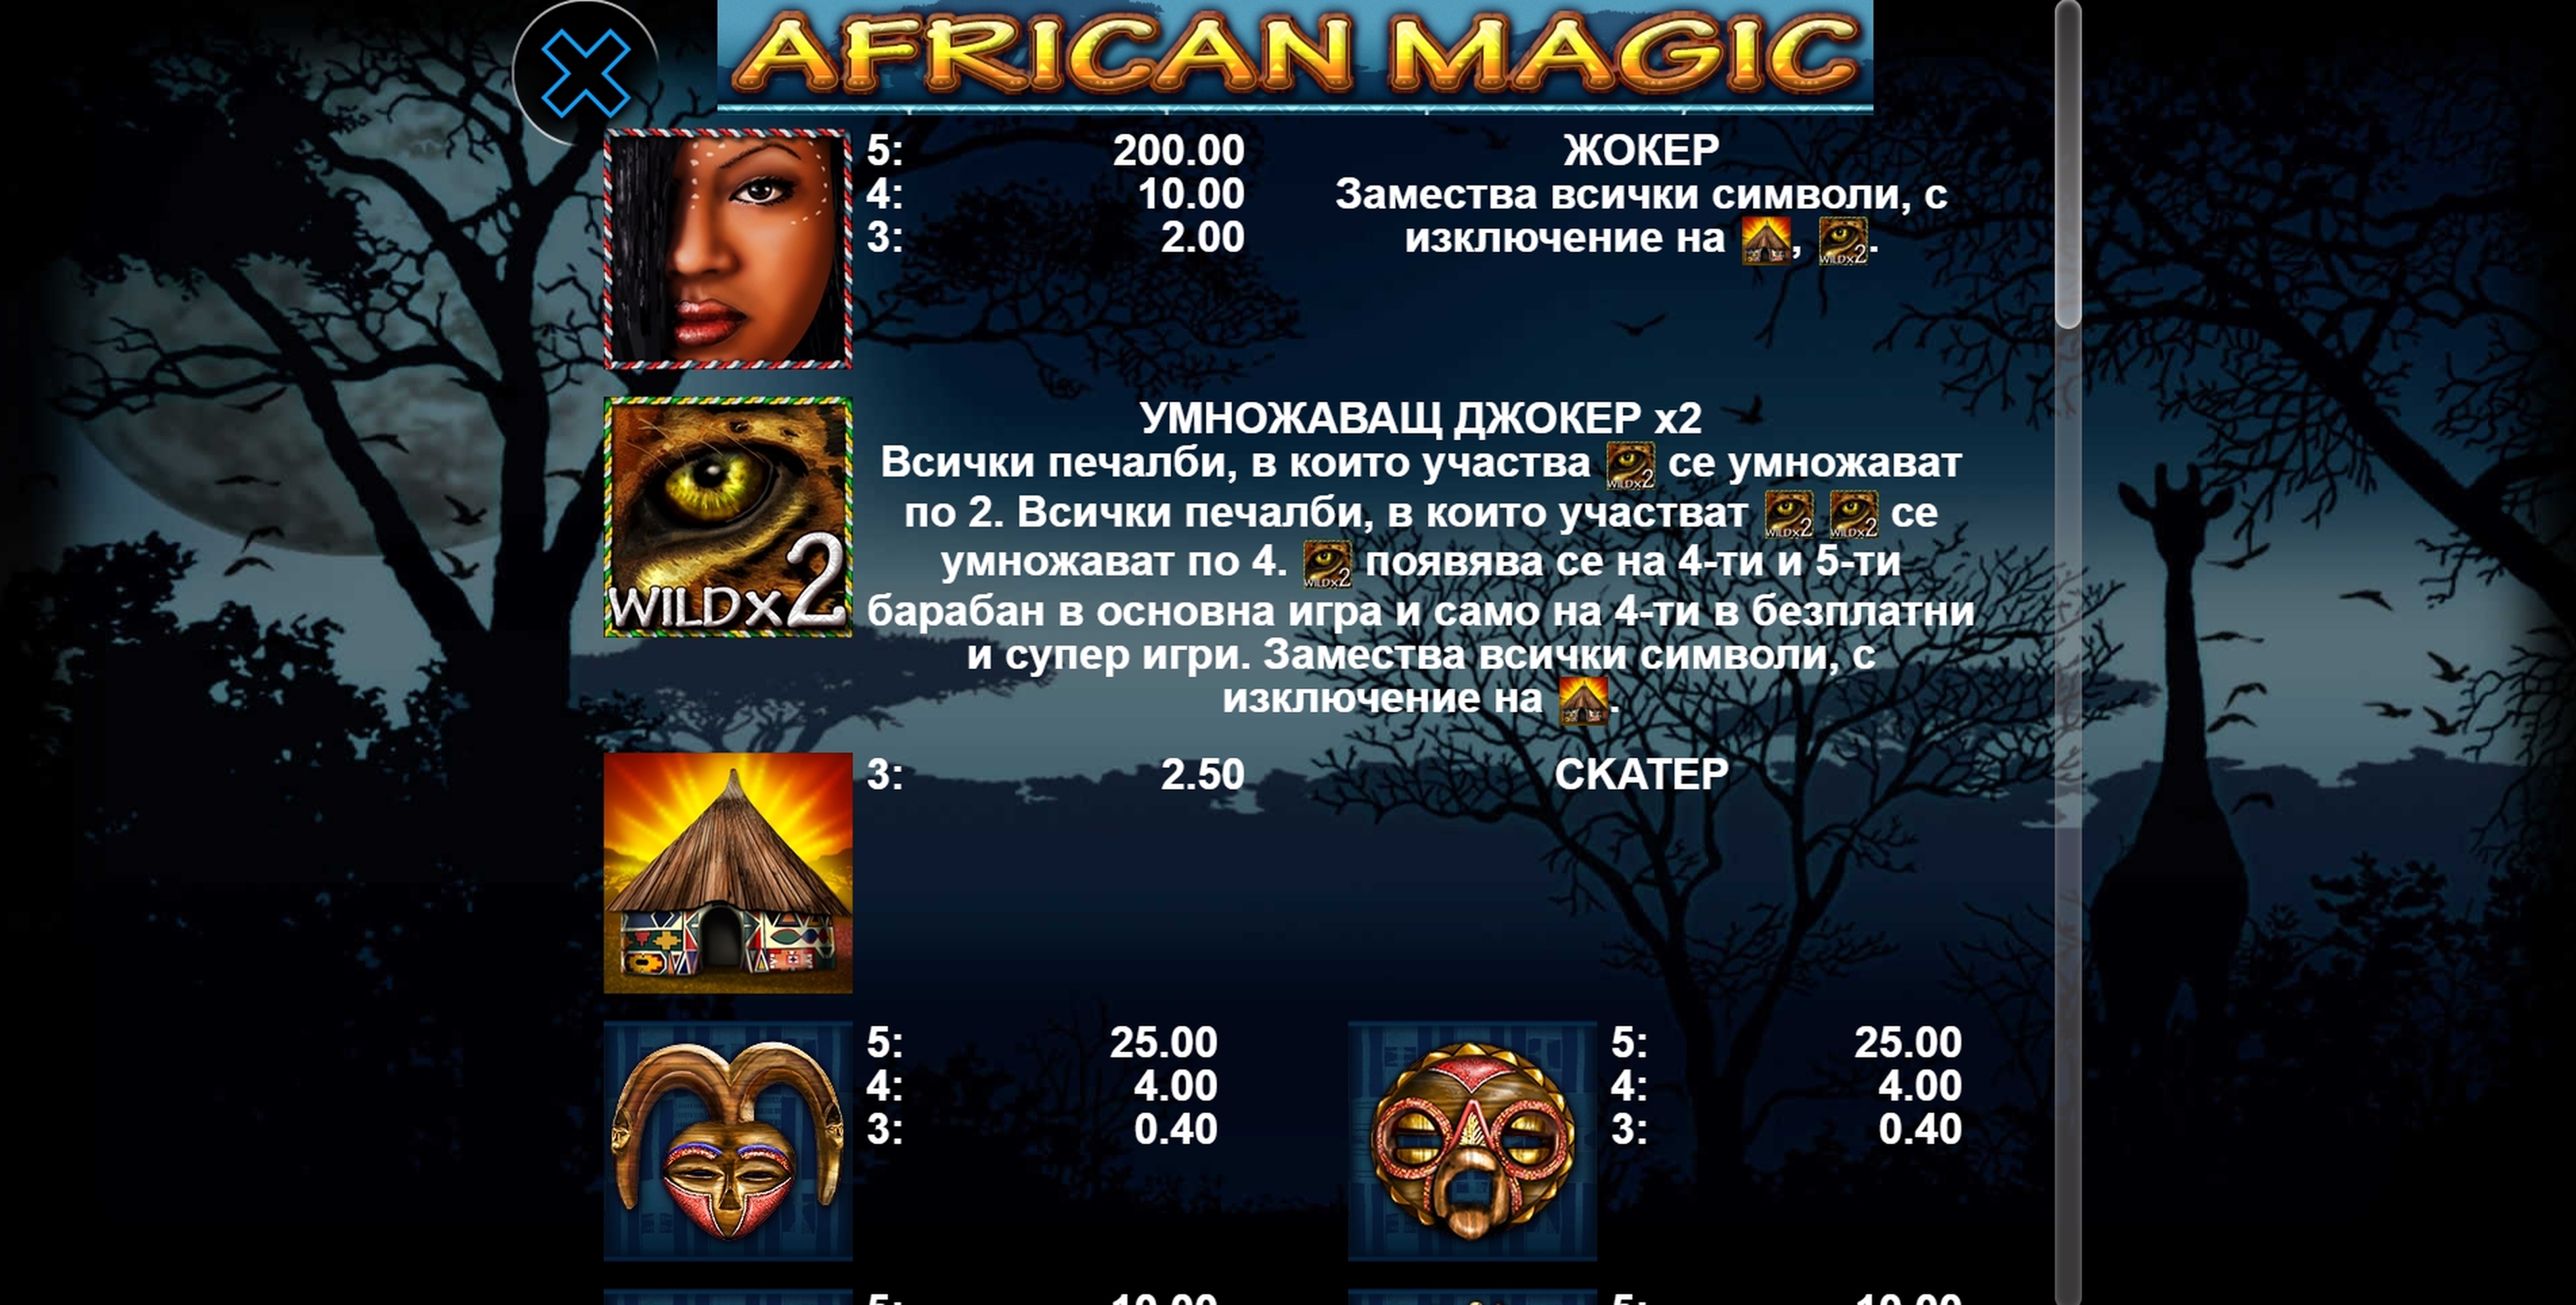 Info of African Magic Slot Game by casino technology